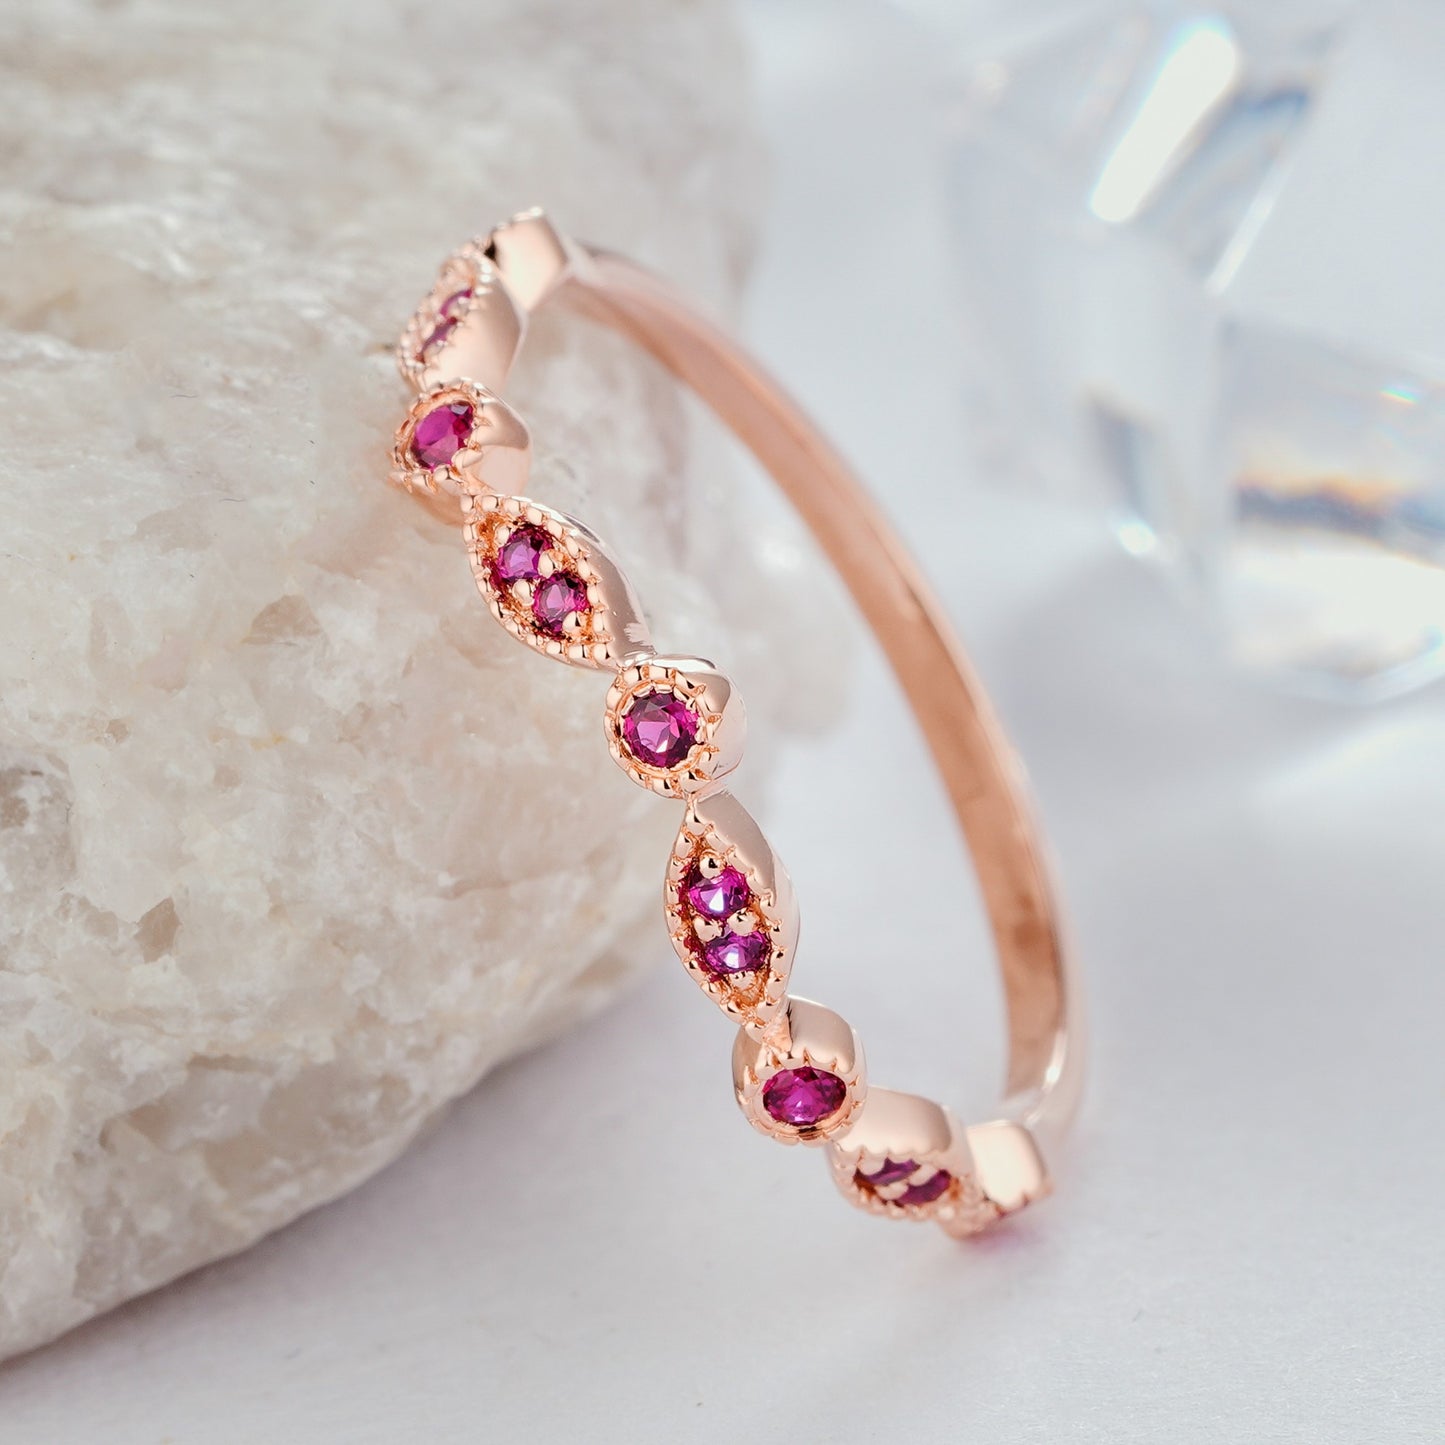 Ruby Birthstone Engagement Ring V Shaped Band Ring in 14K/18K Gold - ShainJewelry